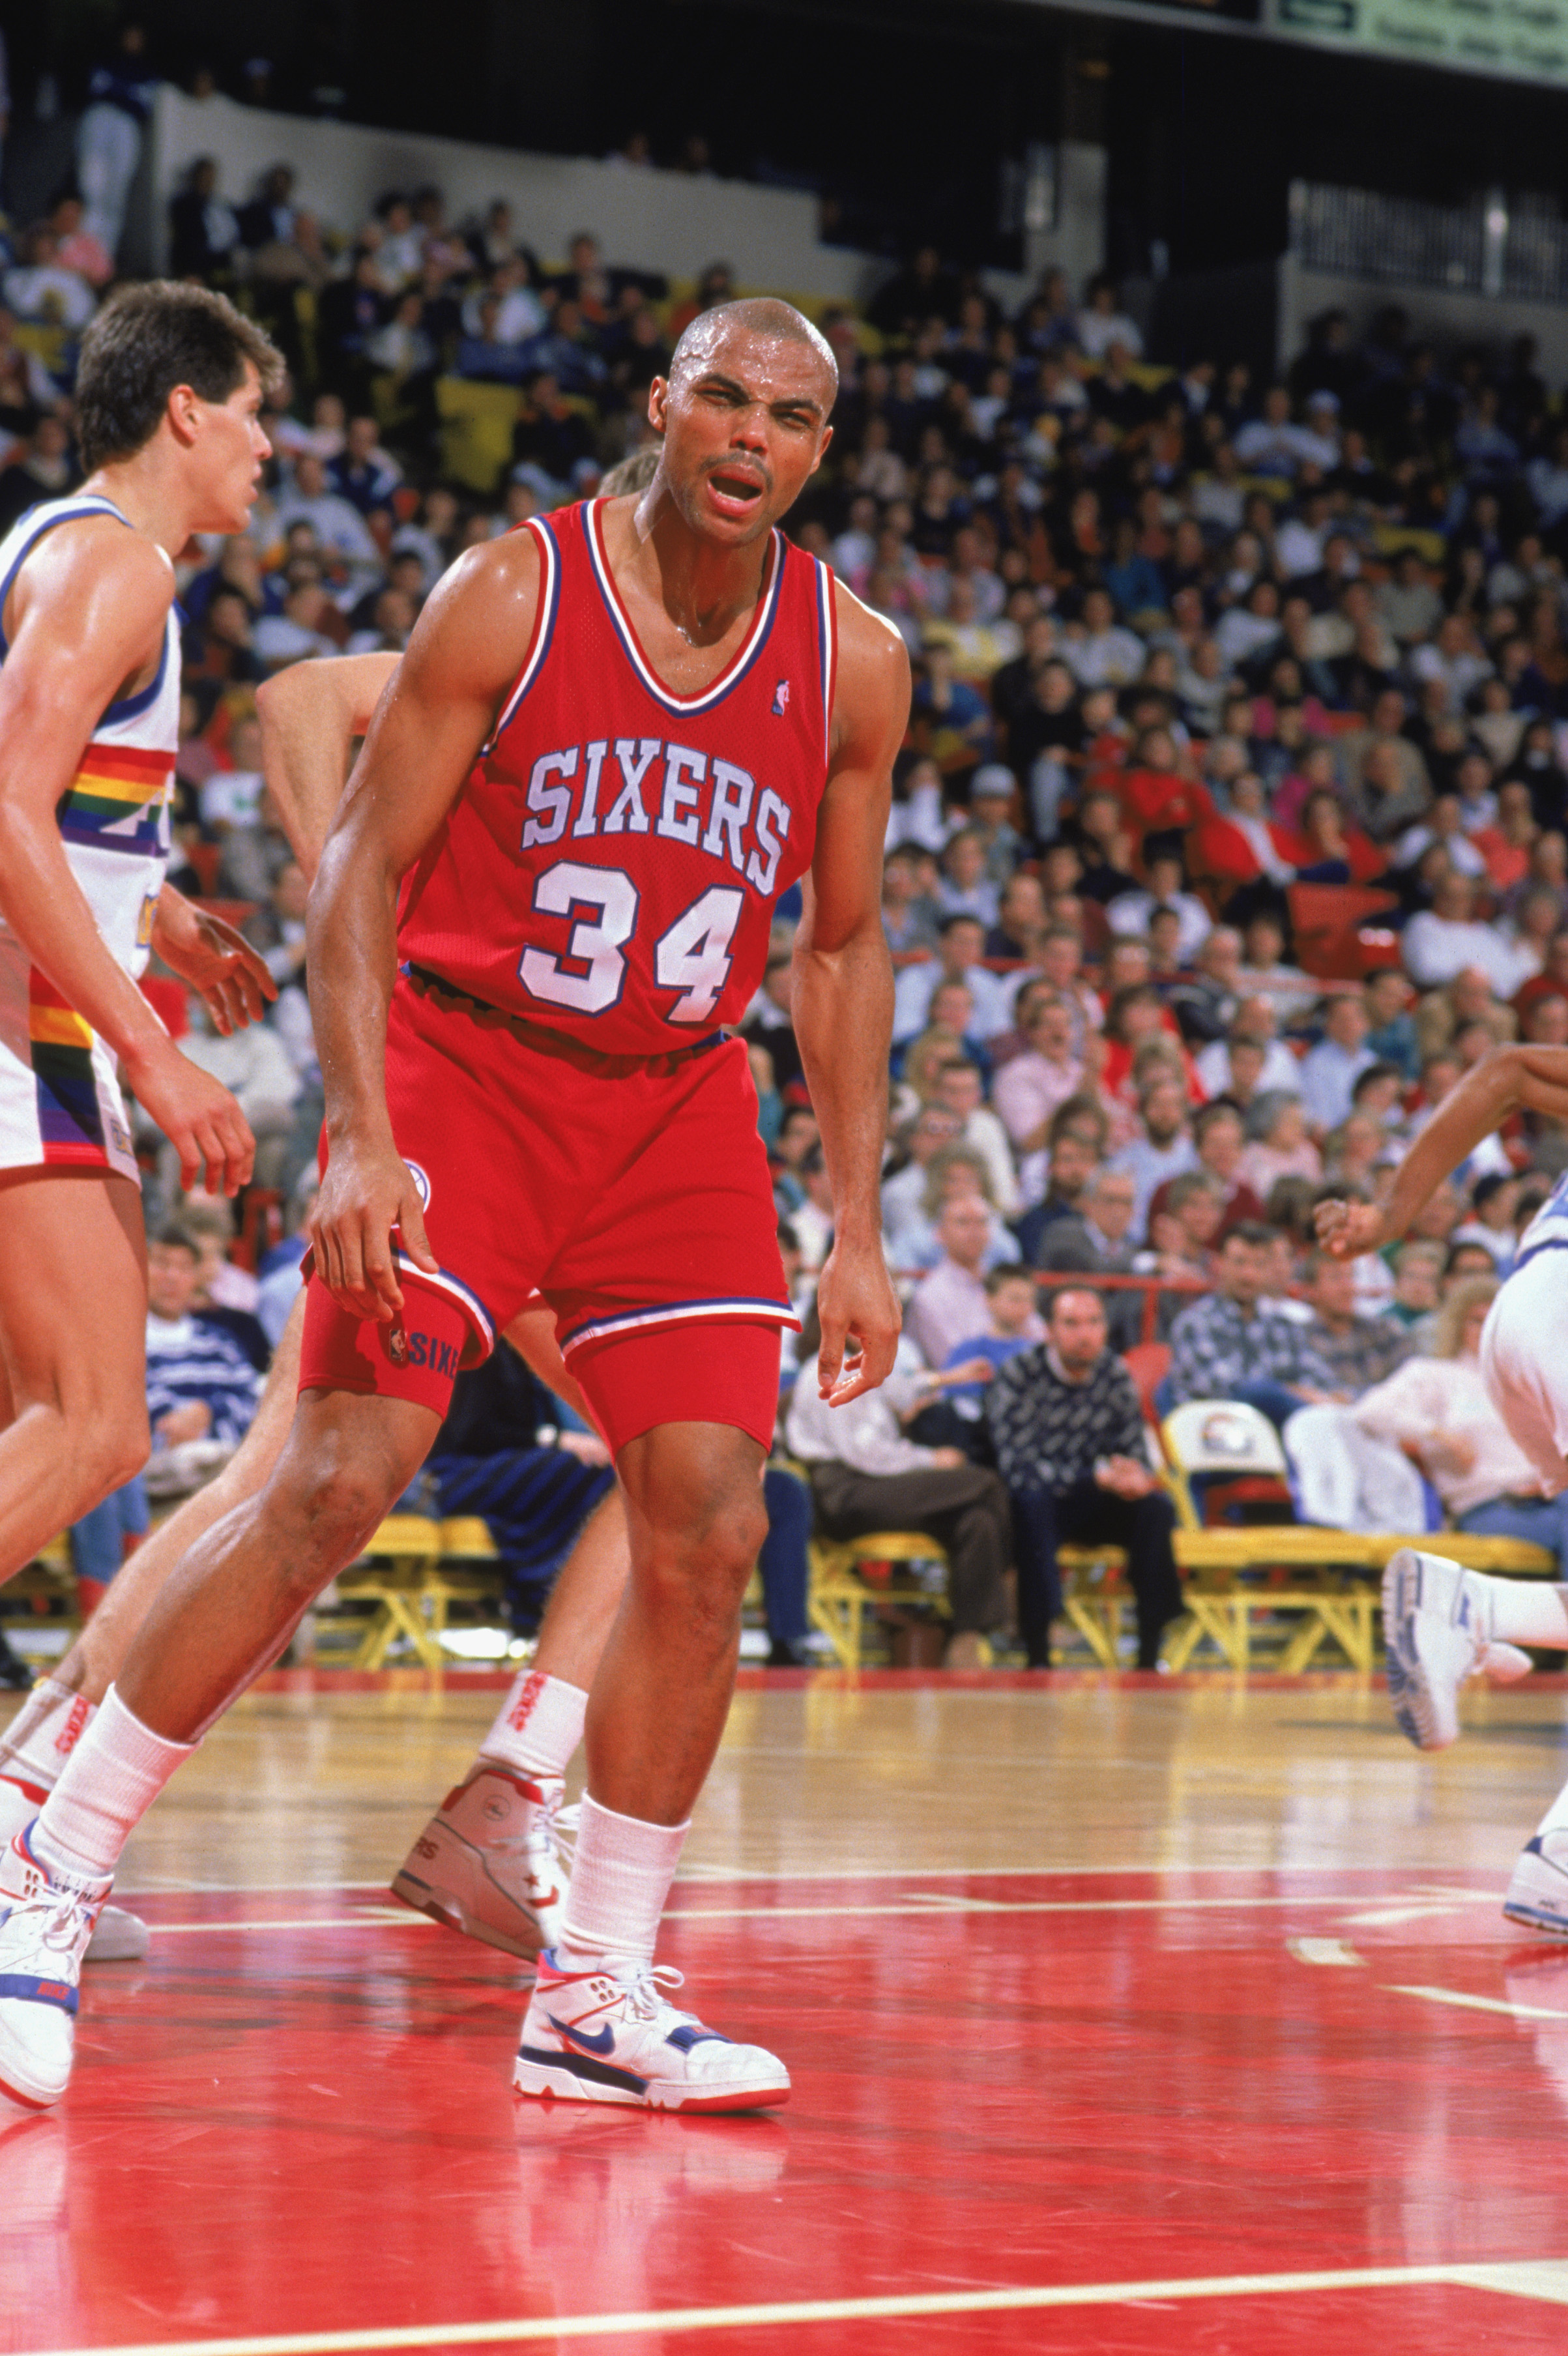 DENVER - 1989:  Charles Barkley #34 of the Philadelphia 76ers reacts to the 1989-1990 NBA season game at the McNichols Arena in Denver, Colorado. (Photo by Tim Defrisco/Getty Images)